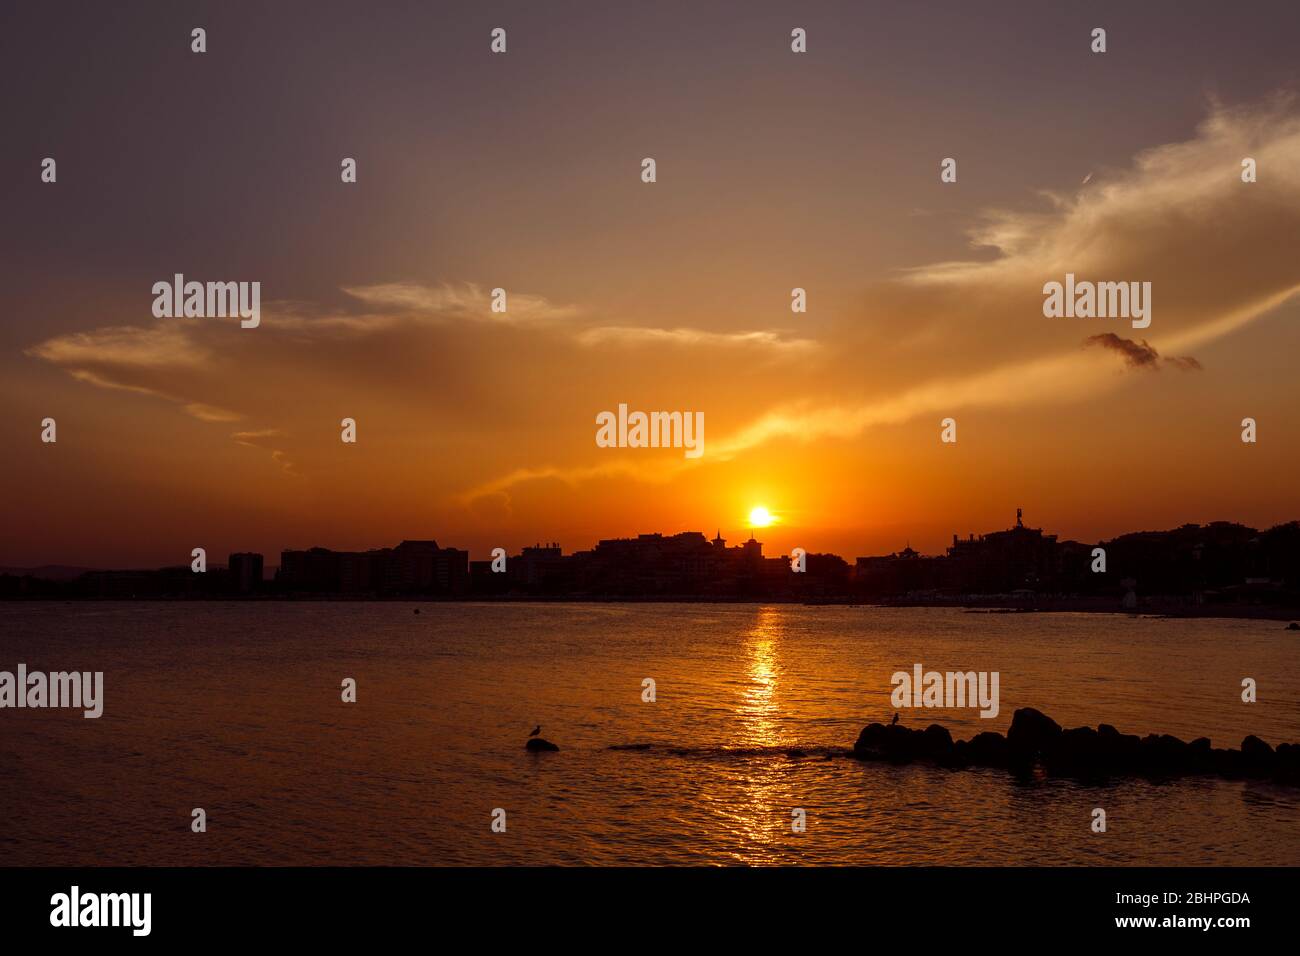 Sunset over the city. Silhouette of the city at the seaside. Dramatic sky. Stock Photo